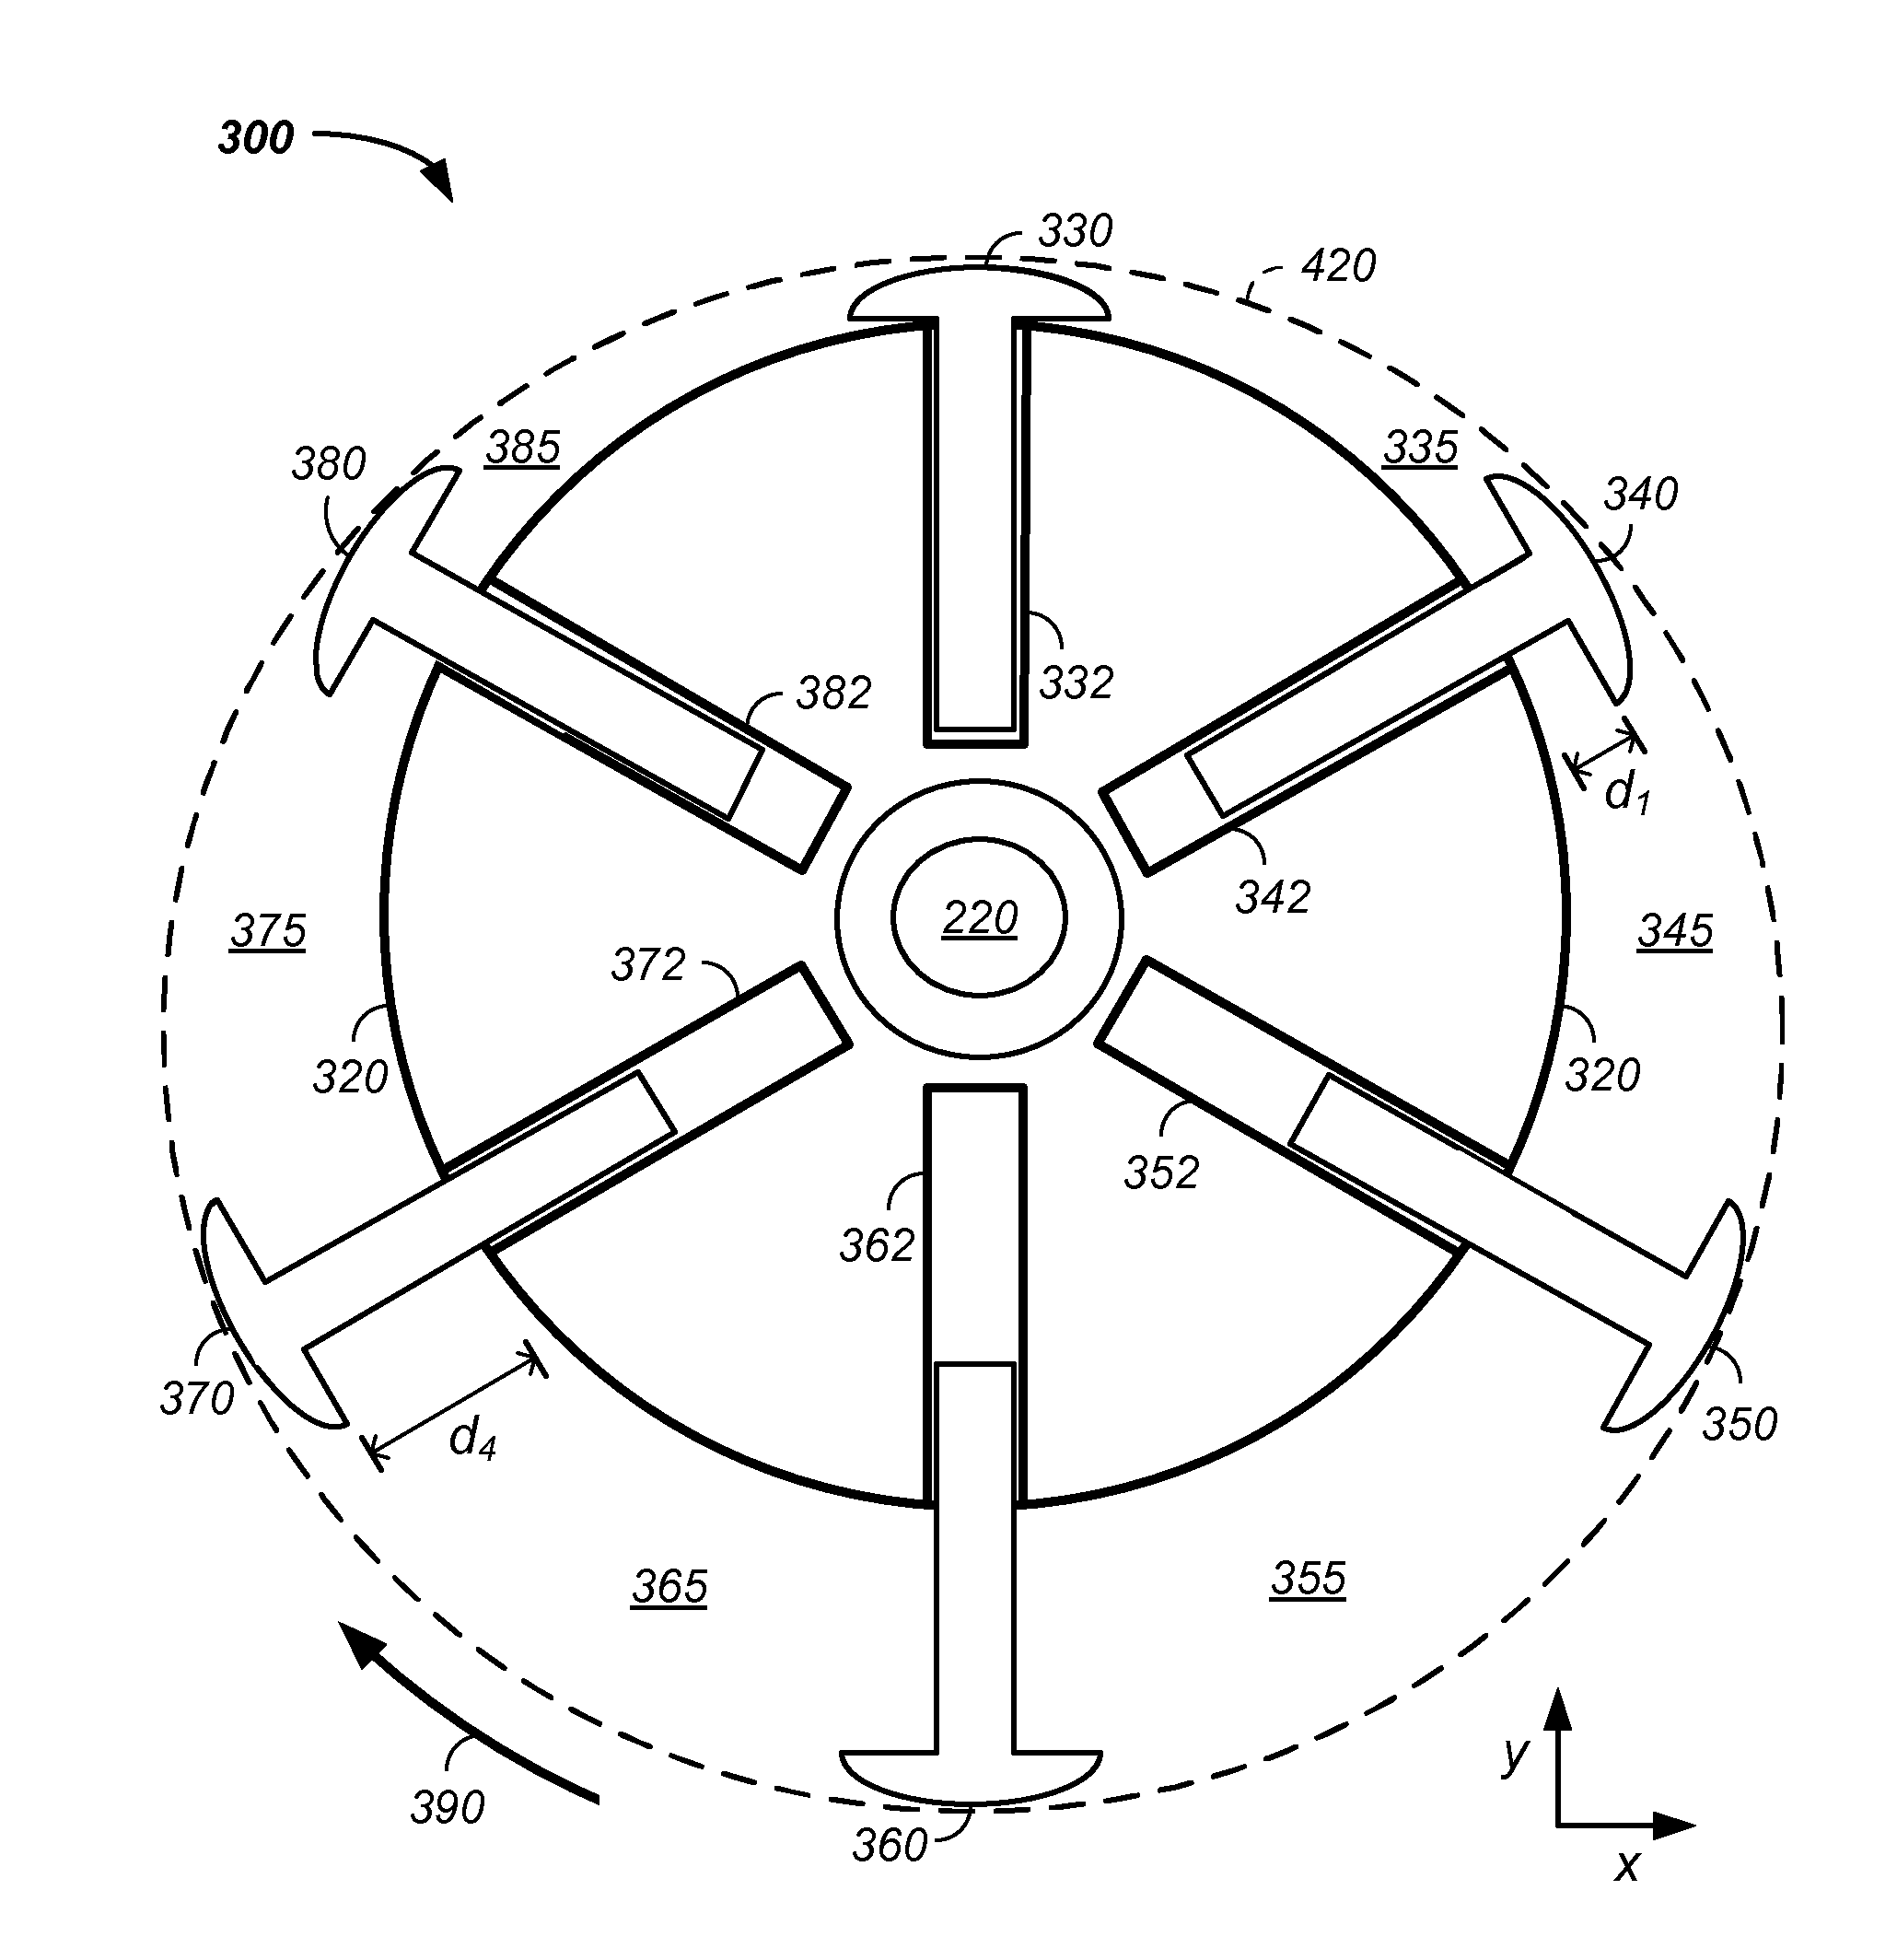 Rotary engine lip-seal apparatus and method of operation therefor